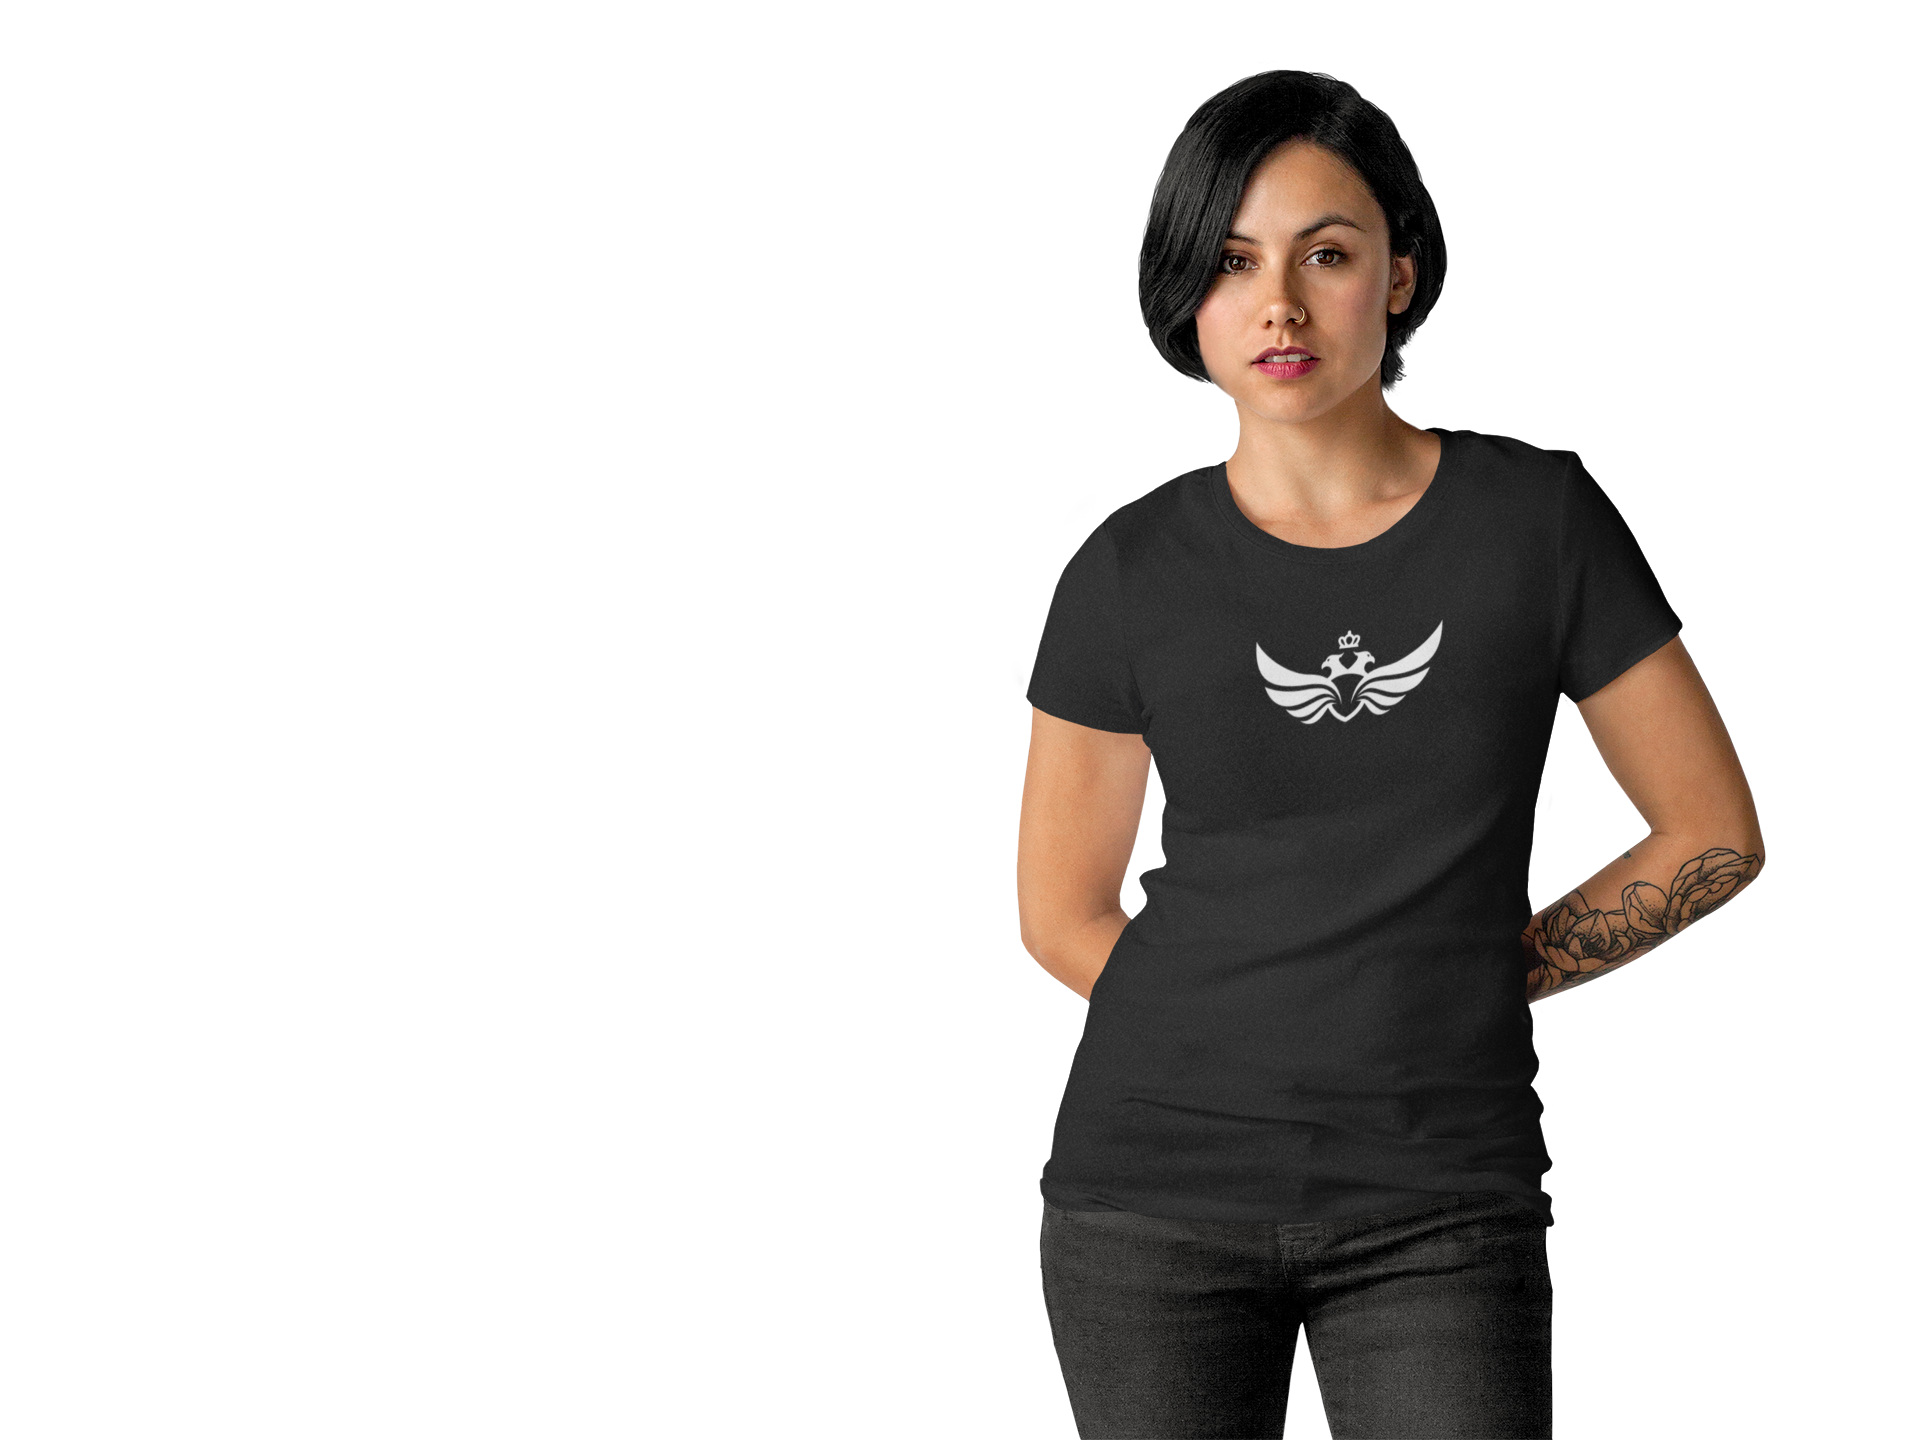 Download t-shirt-mockup-template-of-a-tattooed-woman-over-transparent-background-a10128 copy - Duran Shop